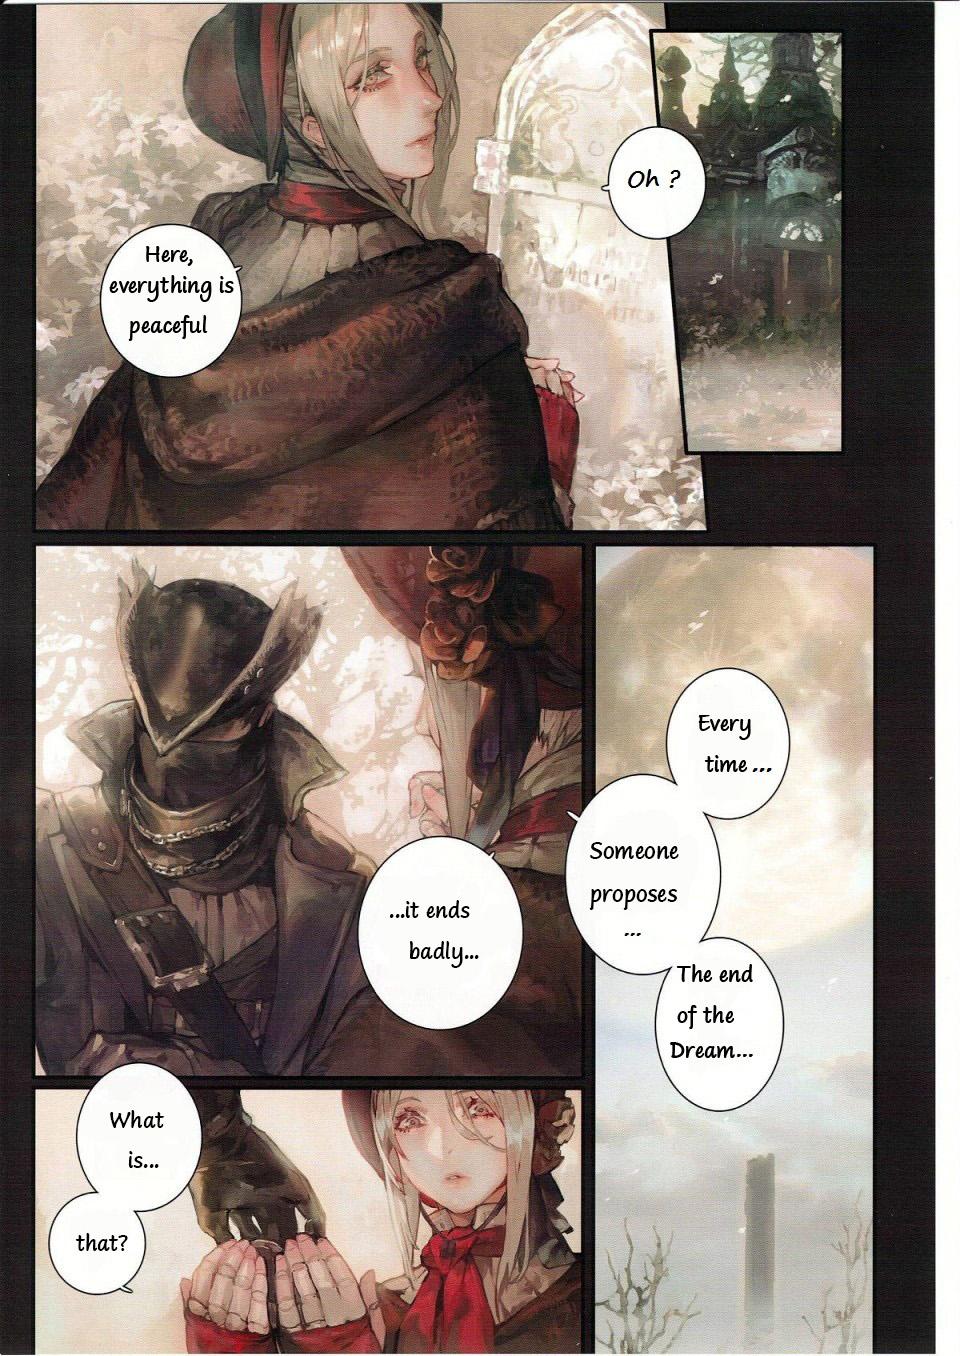 Piss Ornamented Nightmare - Bloodborne Vadia - Page 9